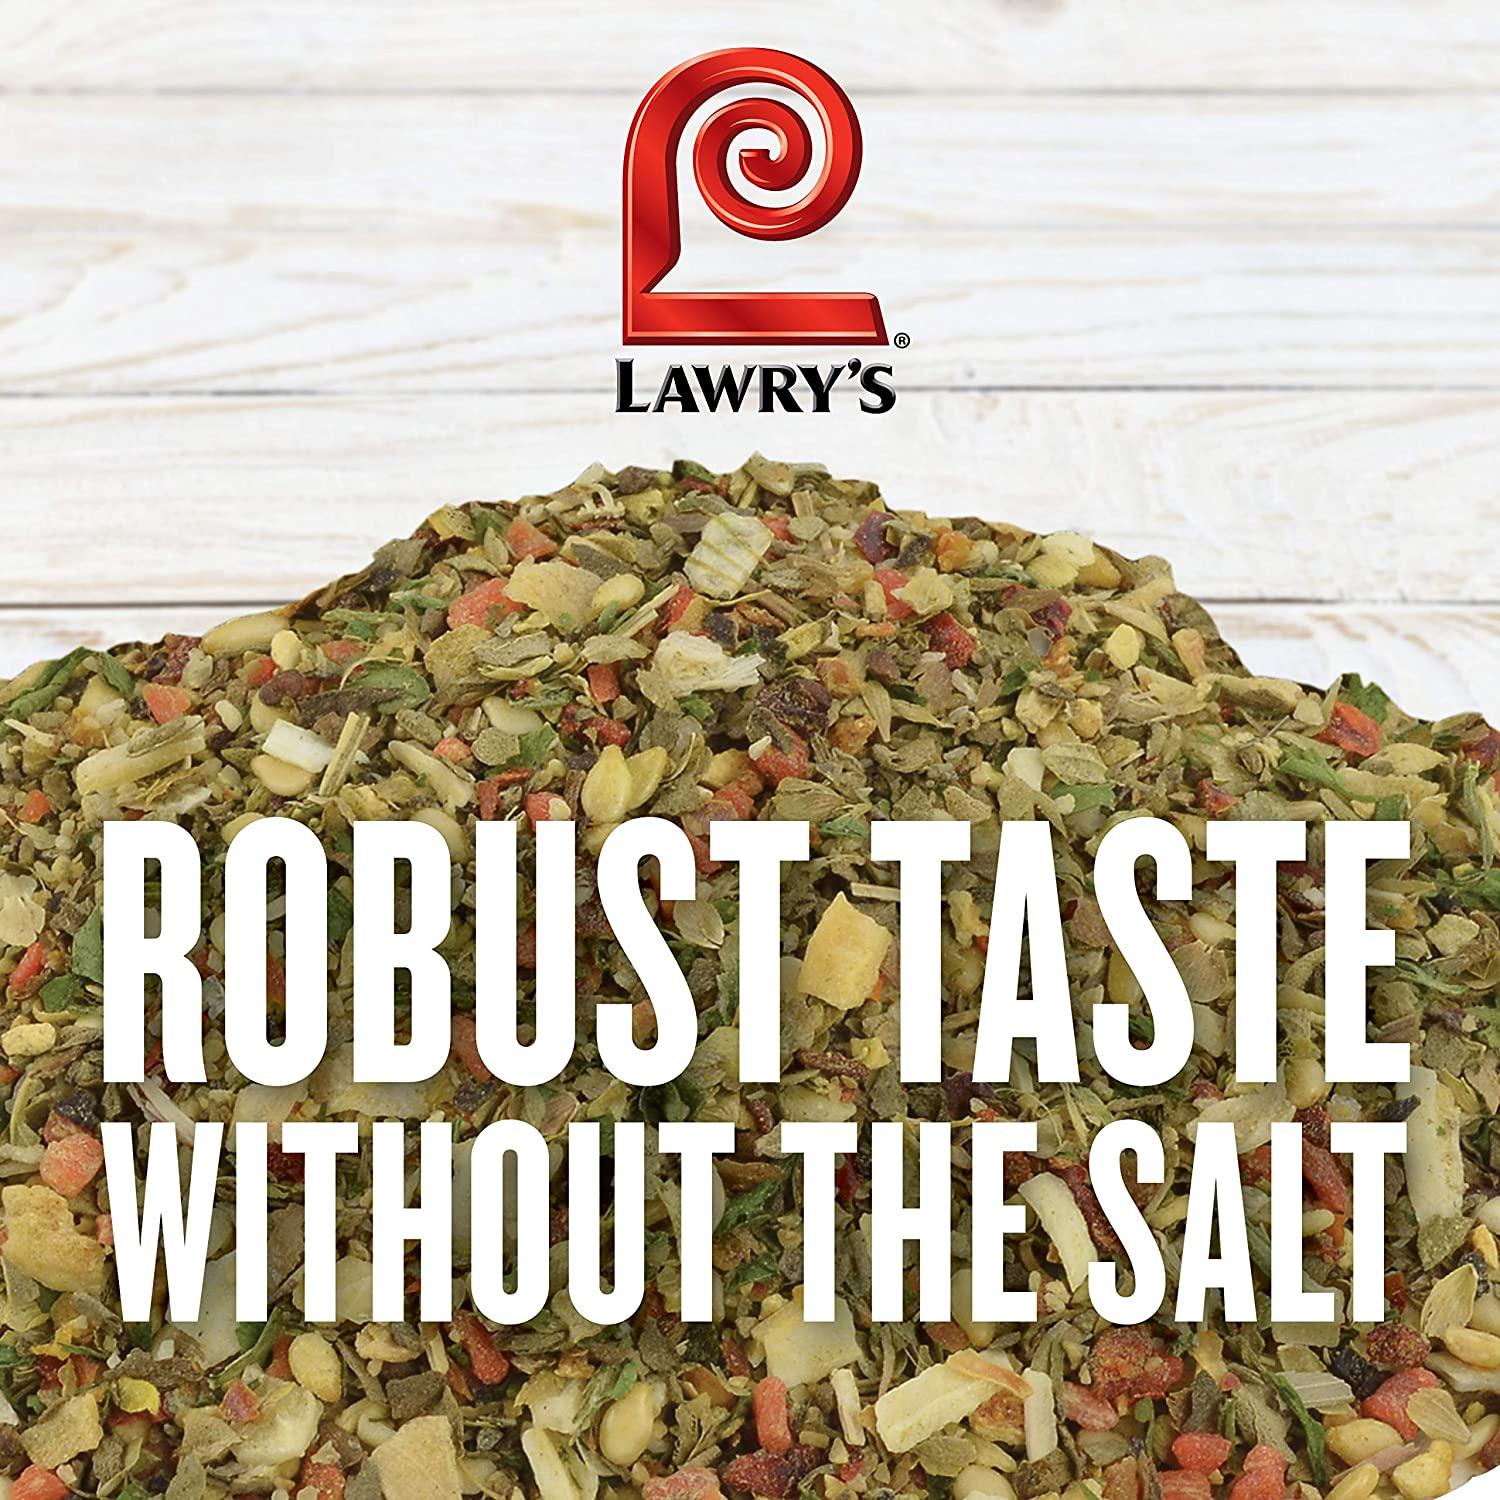 Lawry's Salt Free 17 Seasoning, 10 oz - One 10 Ounce Container of 17  Seasoning Spice Blend Including Toasted Sesame Seeds, Turmeric, Basil and  Red